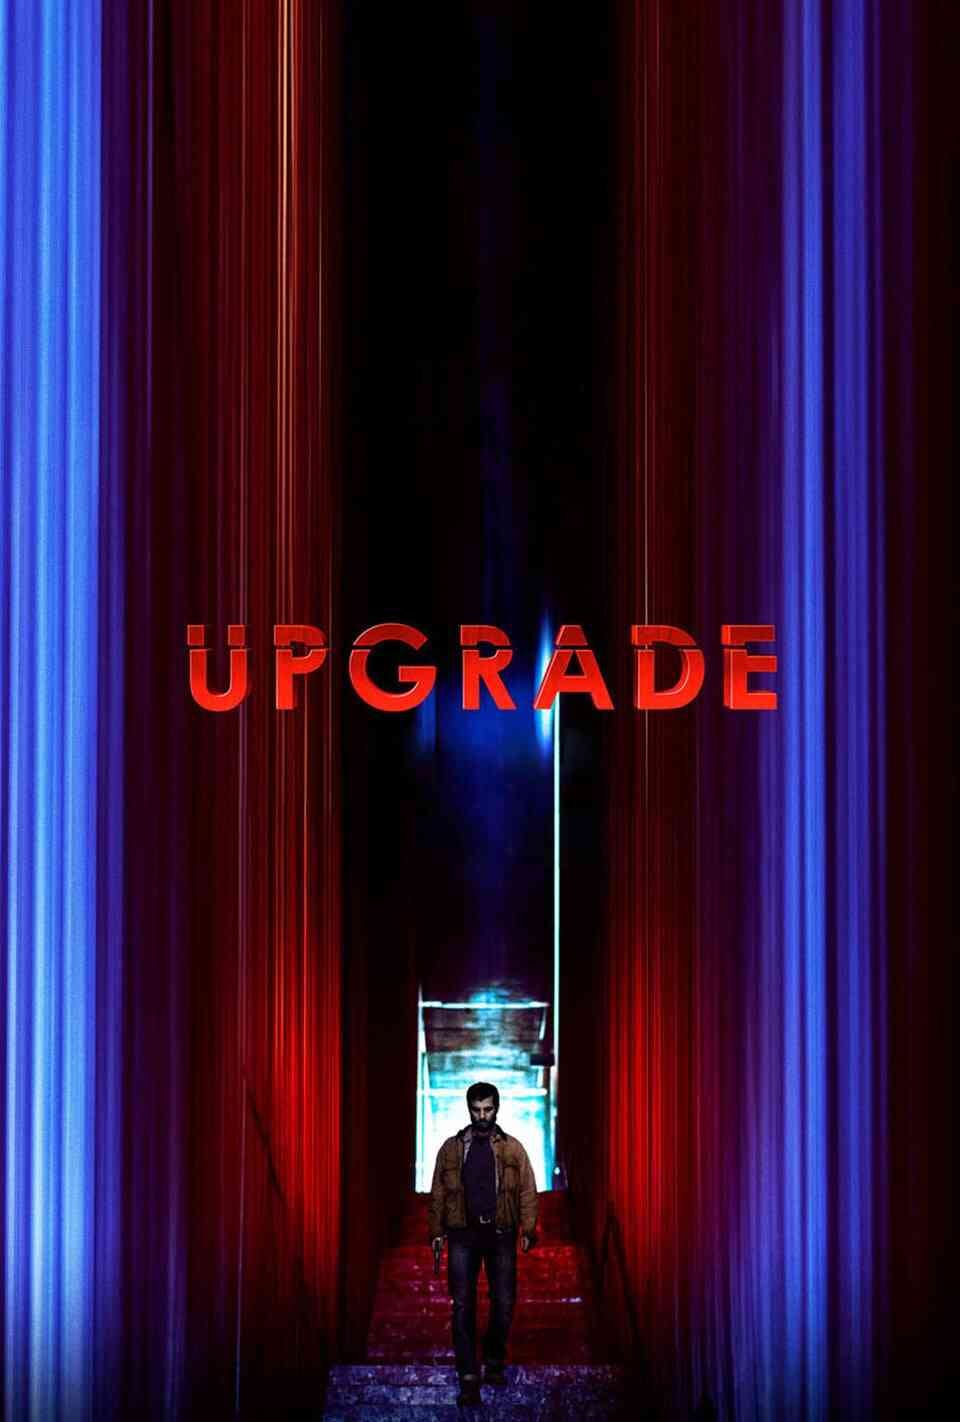 Read Upgrade screenplay (poster)